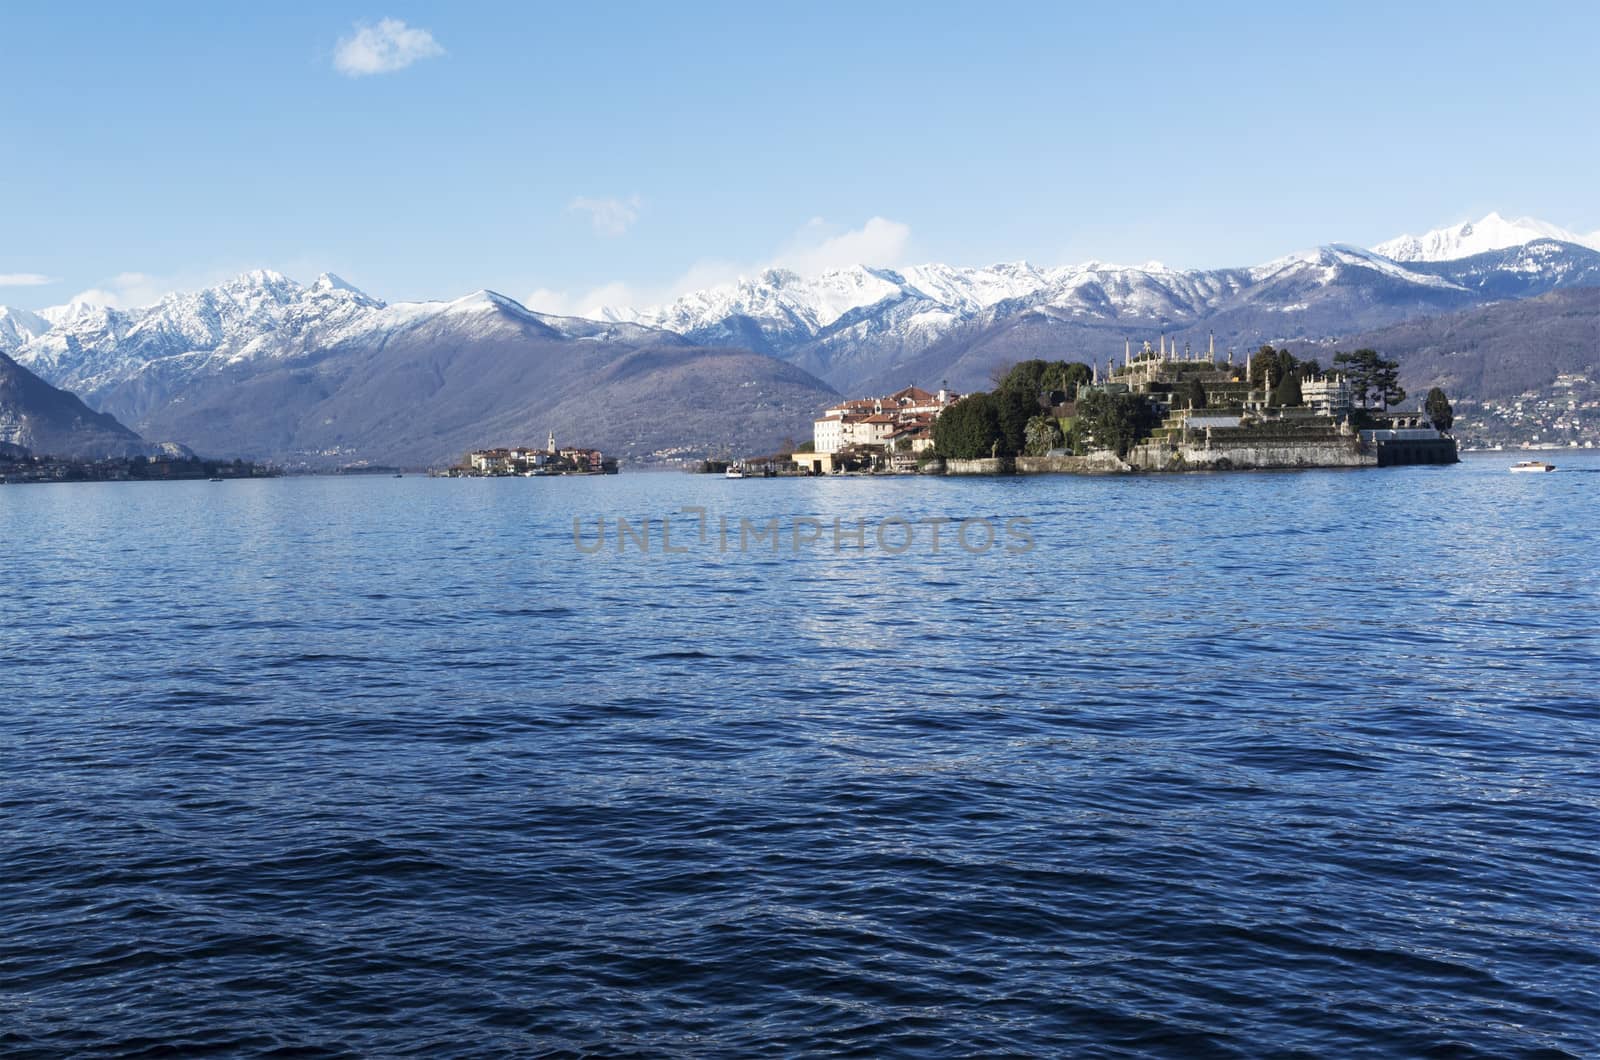 Maggiore lake, landscape from Stresa - Italy by Mdc1970